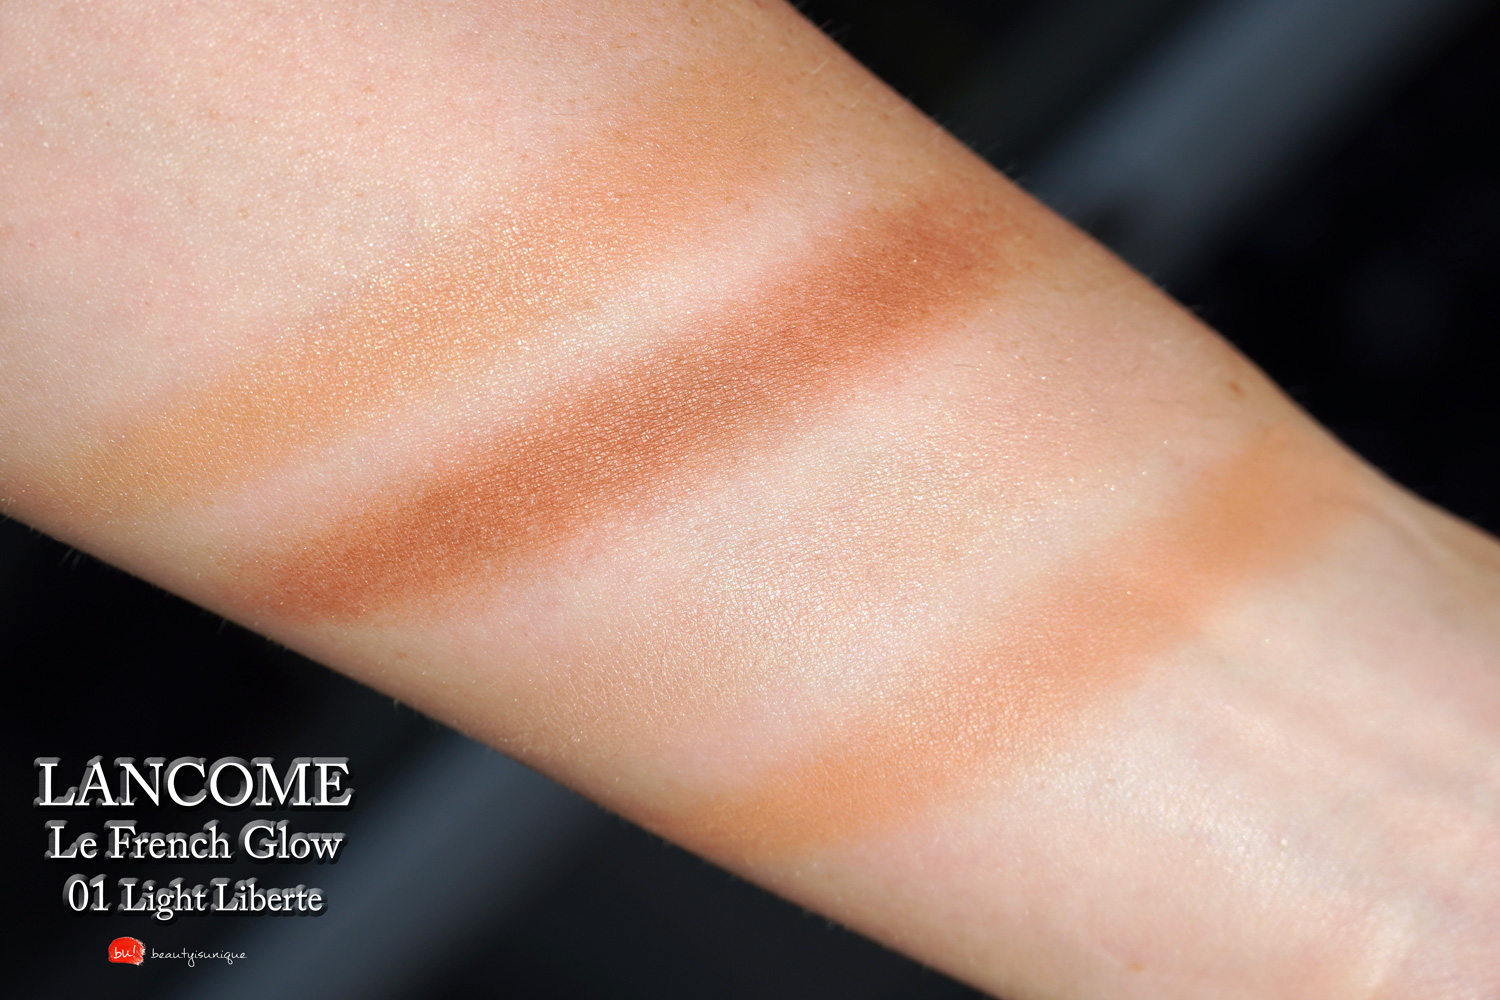 lancome-le-french-glow-light-liberte-swatches